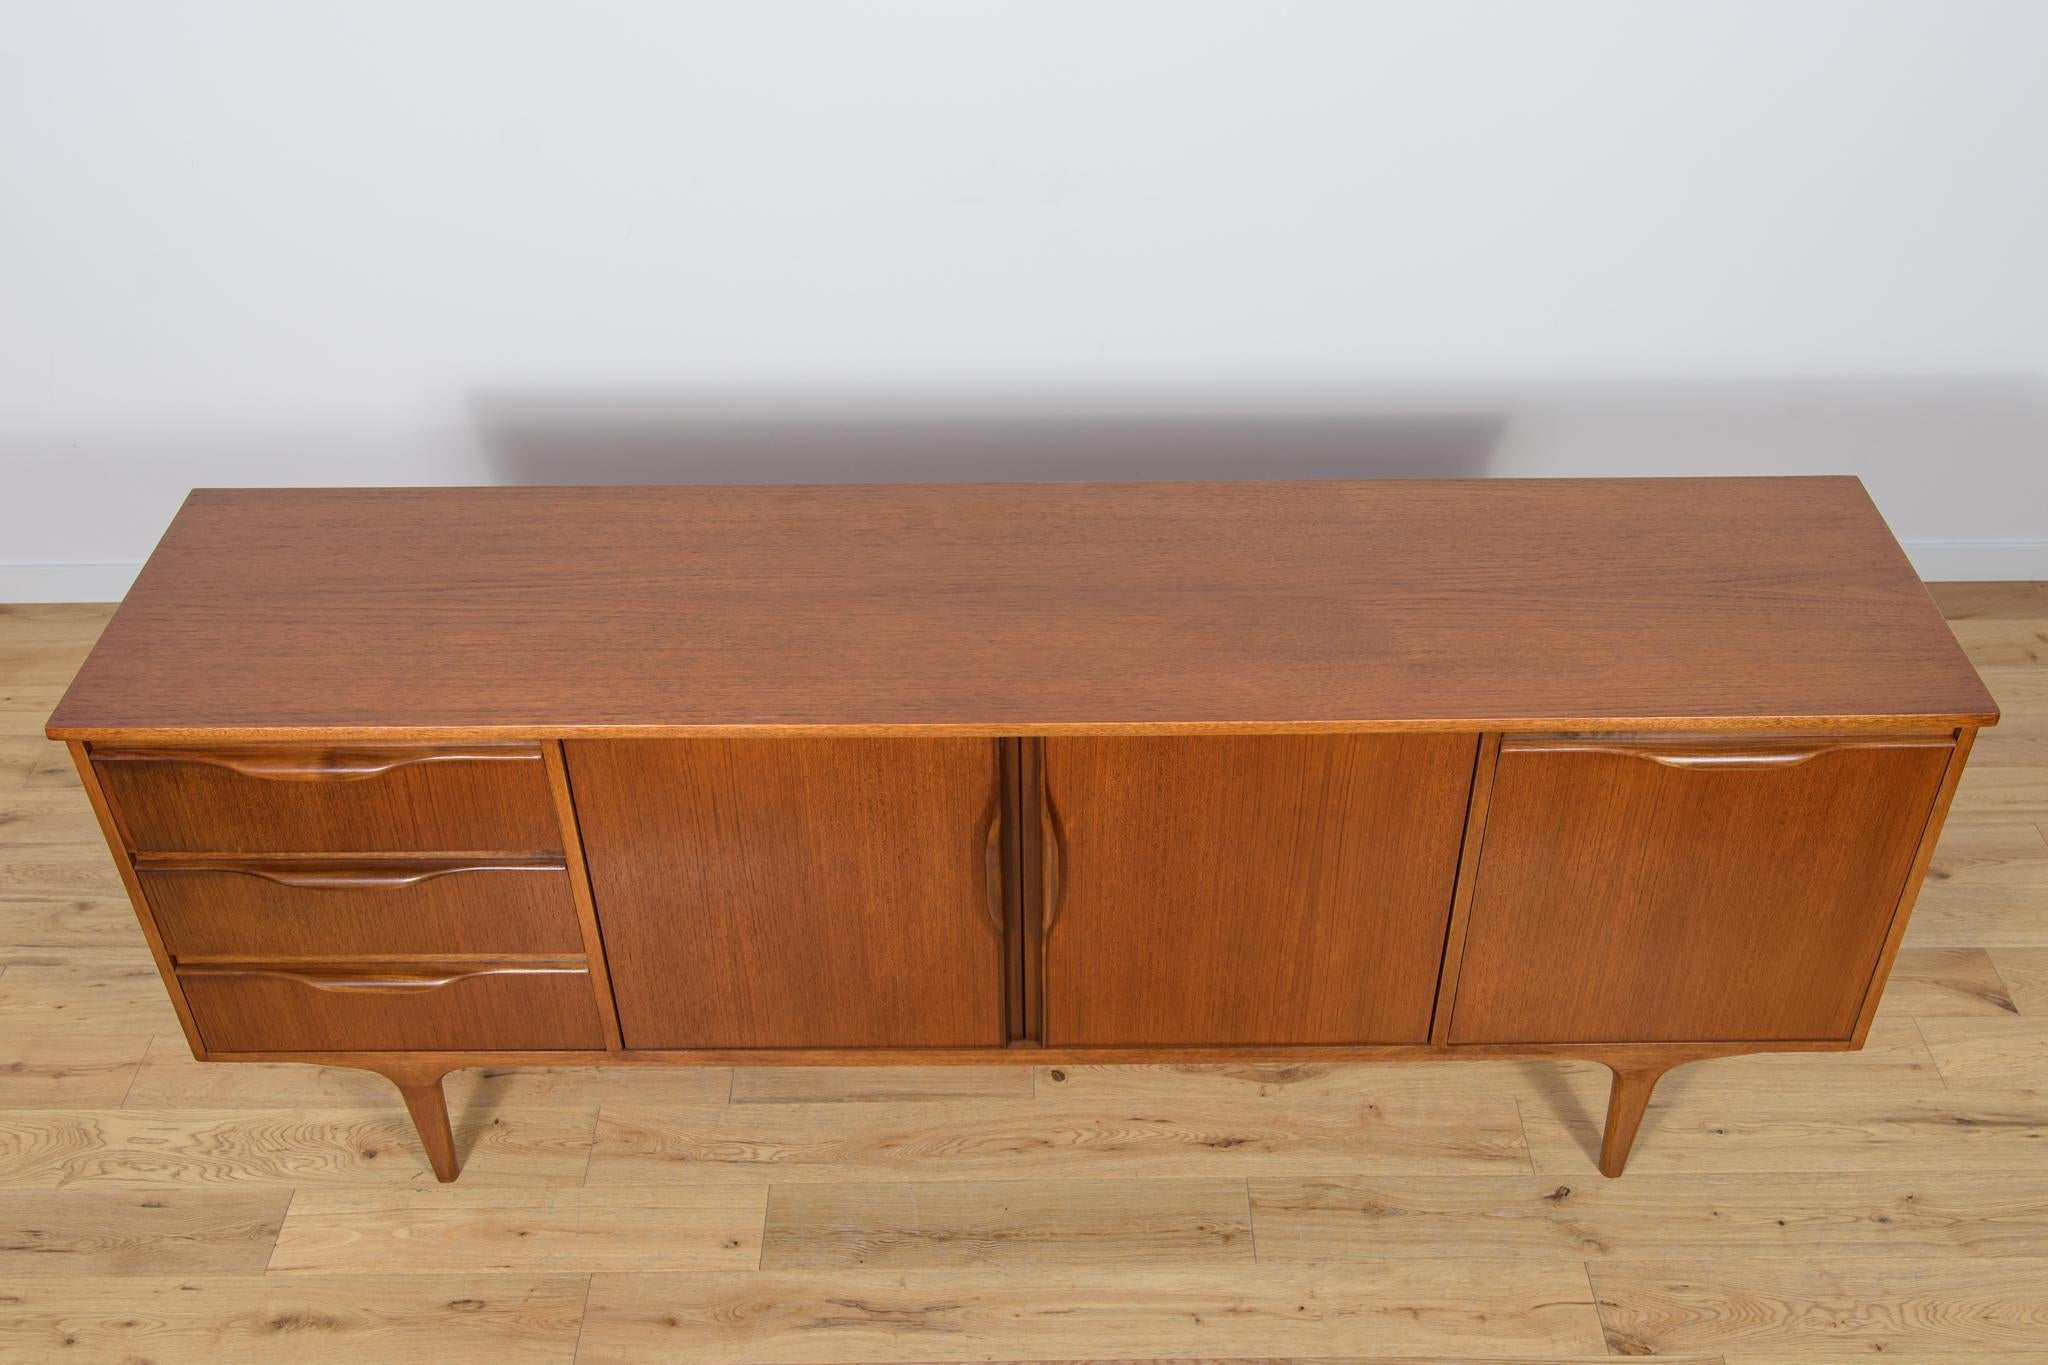 British Mid-Century Teak Sideboard from Jentique, 1960s For Sale